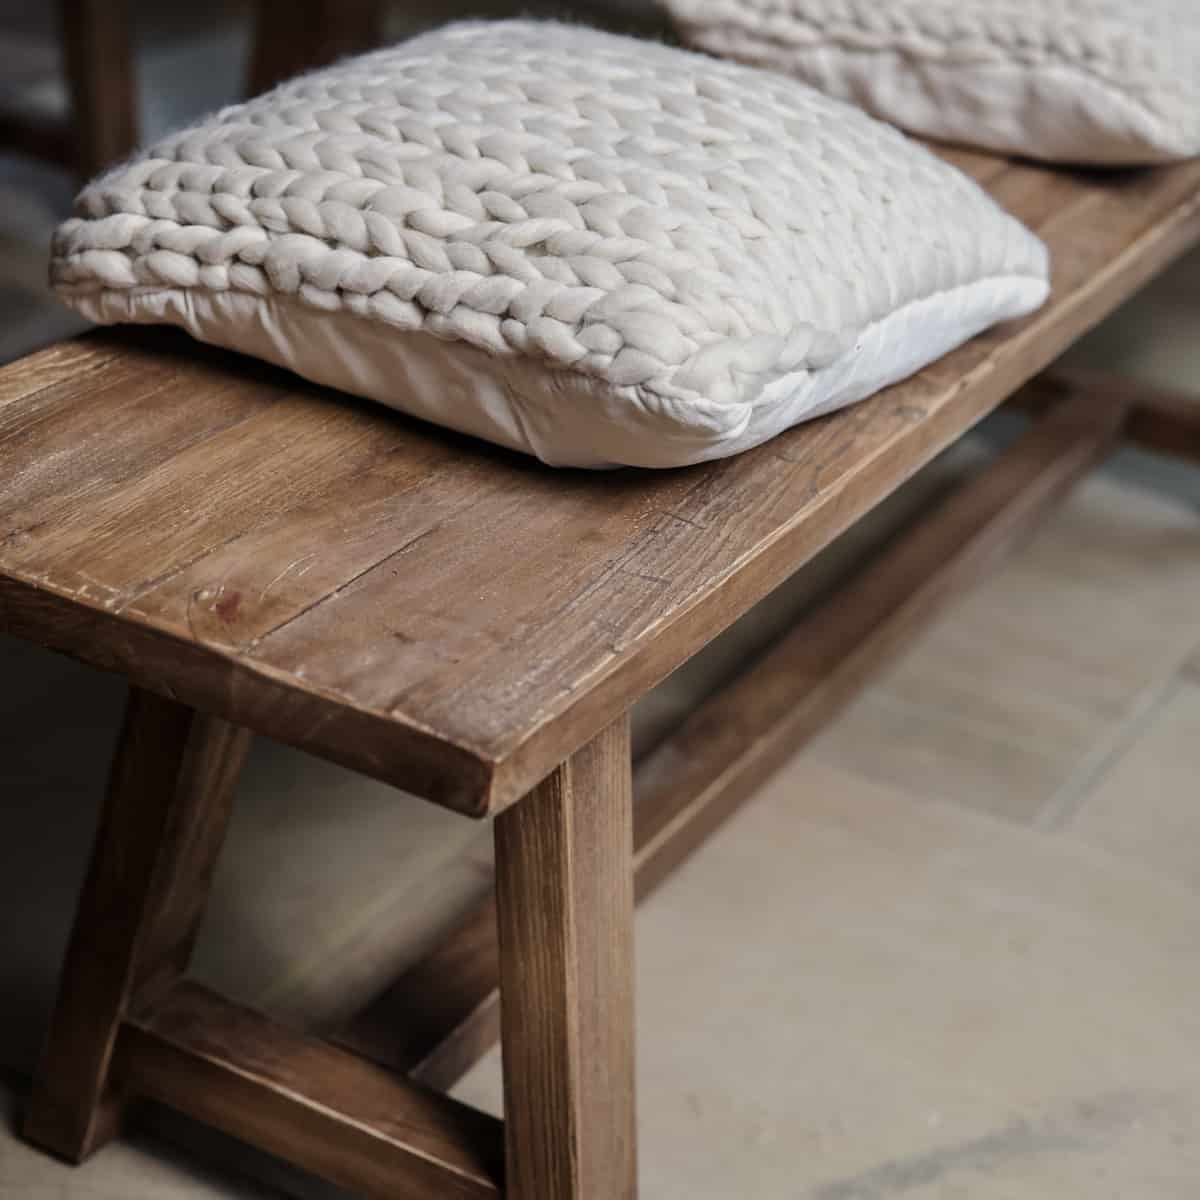 Oak bench with cream cushion close up.